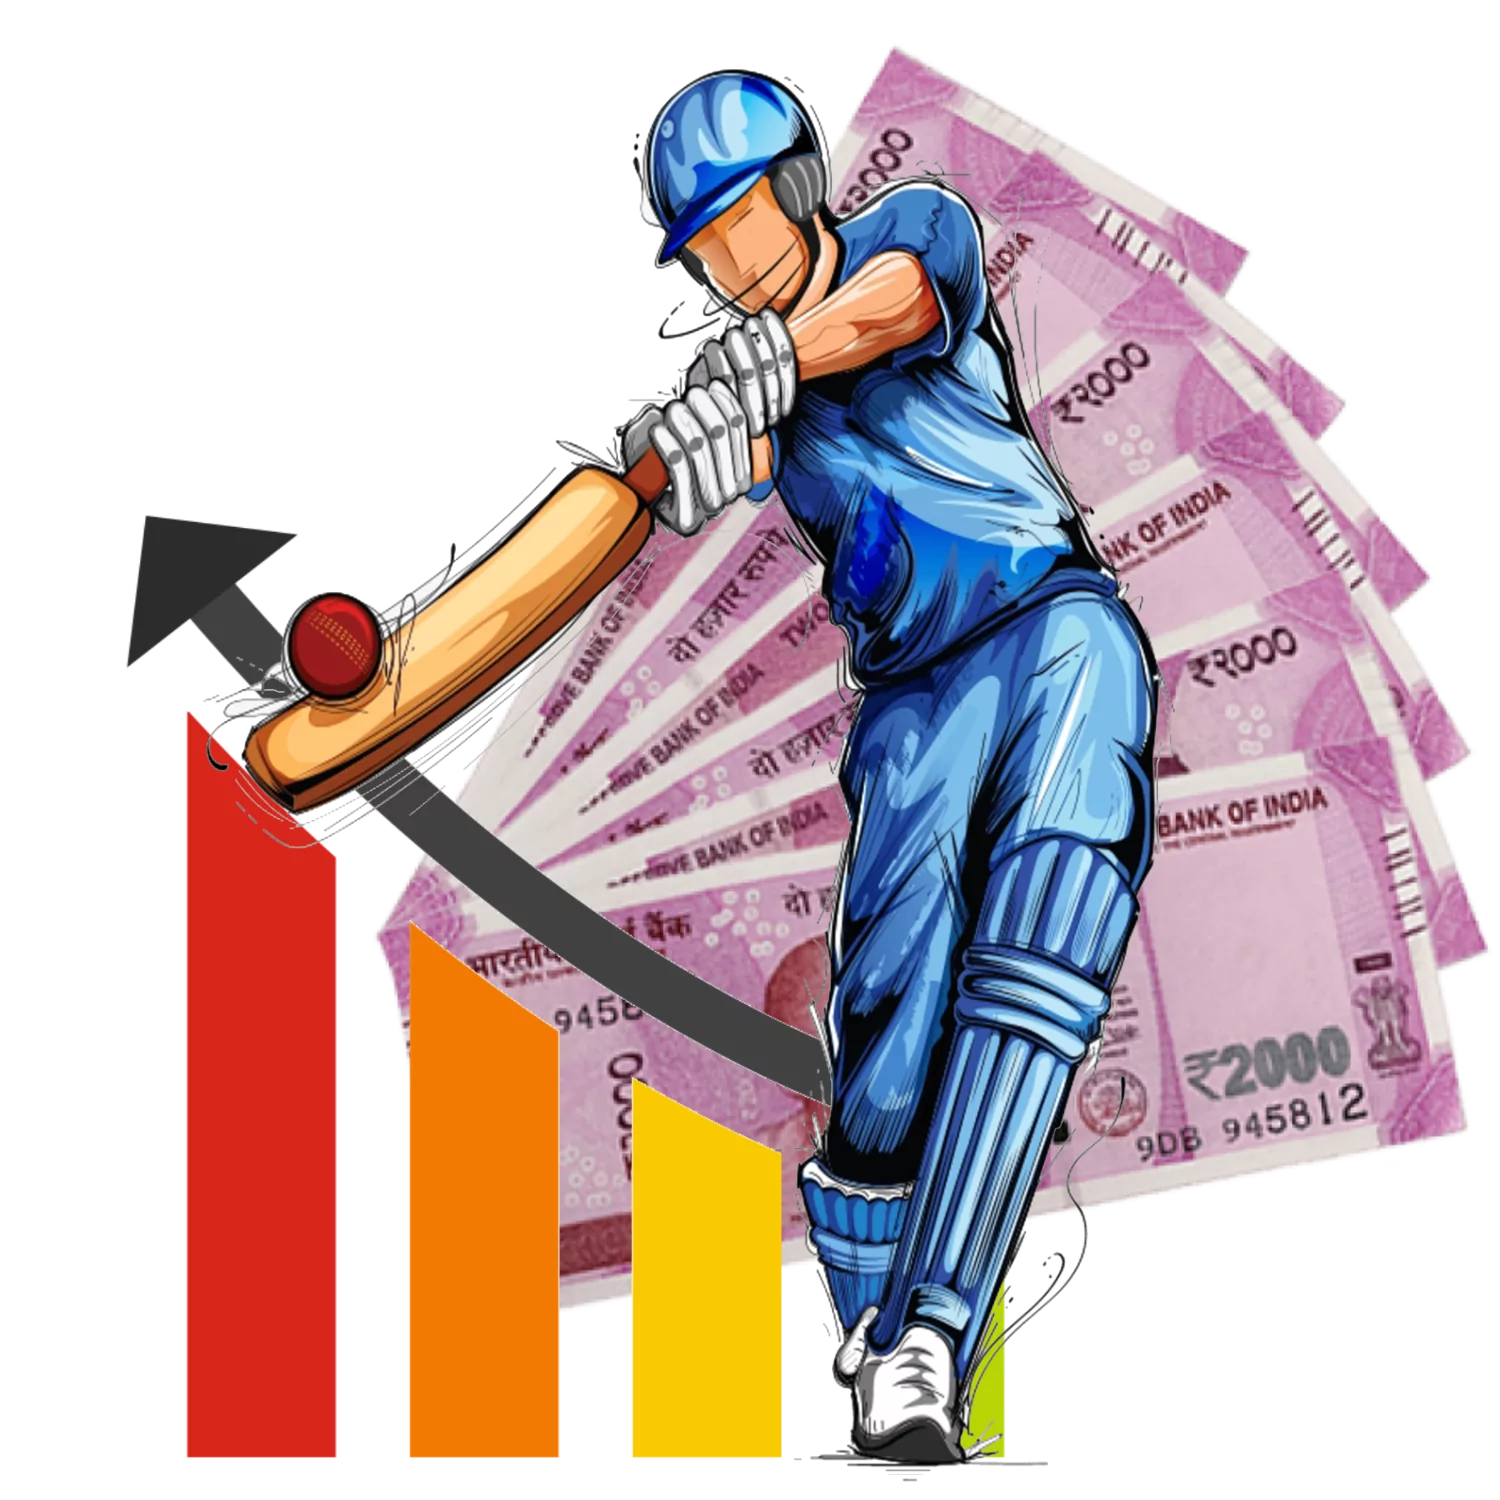 Register at 888sport and place cricket bets absoluteley safely and legally.